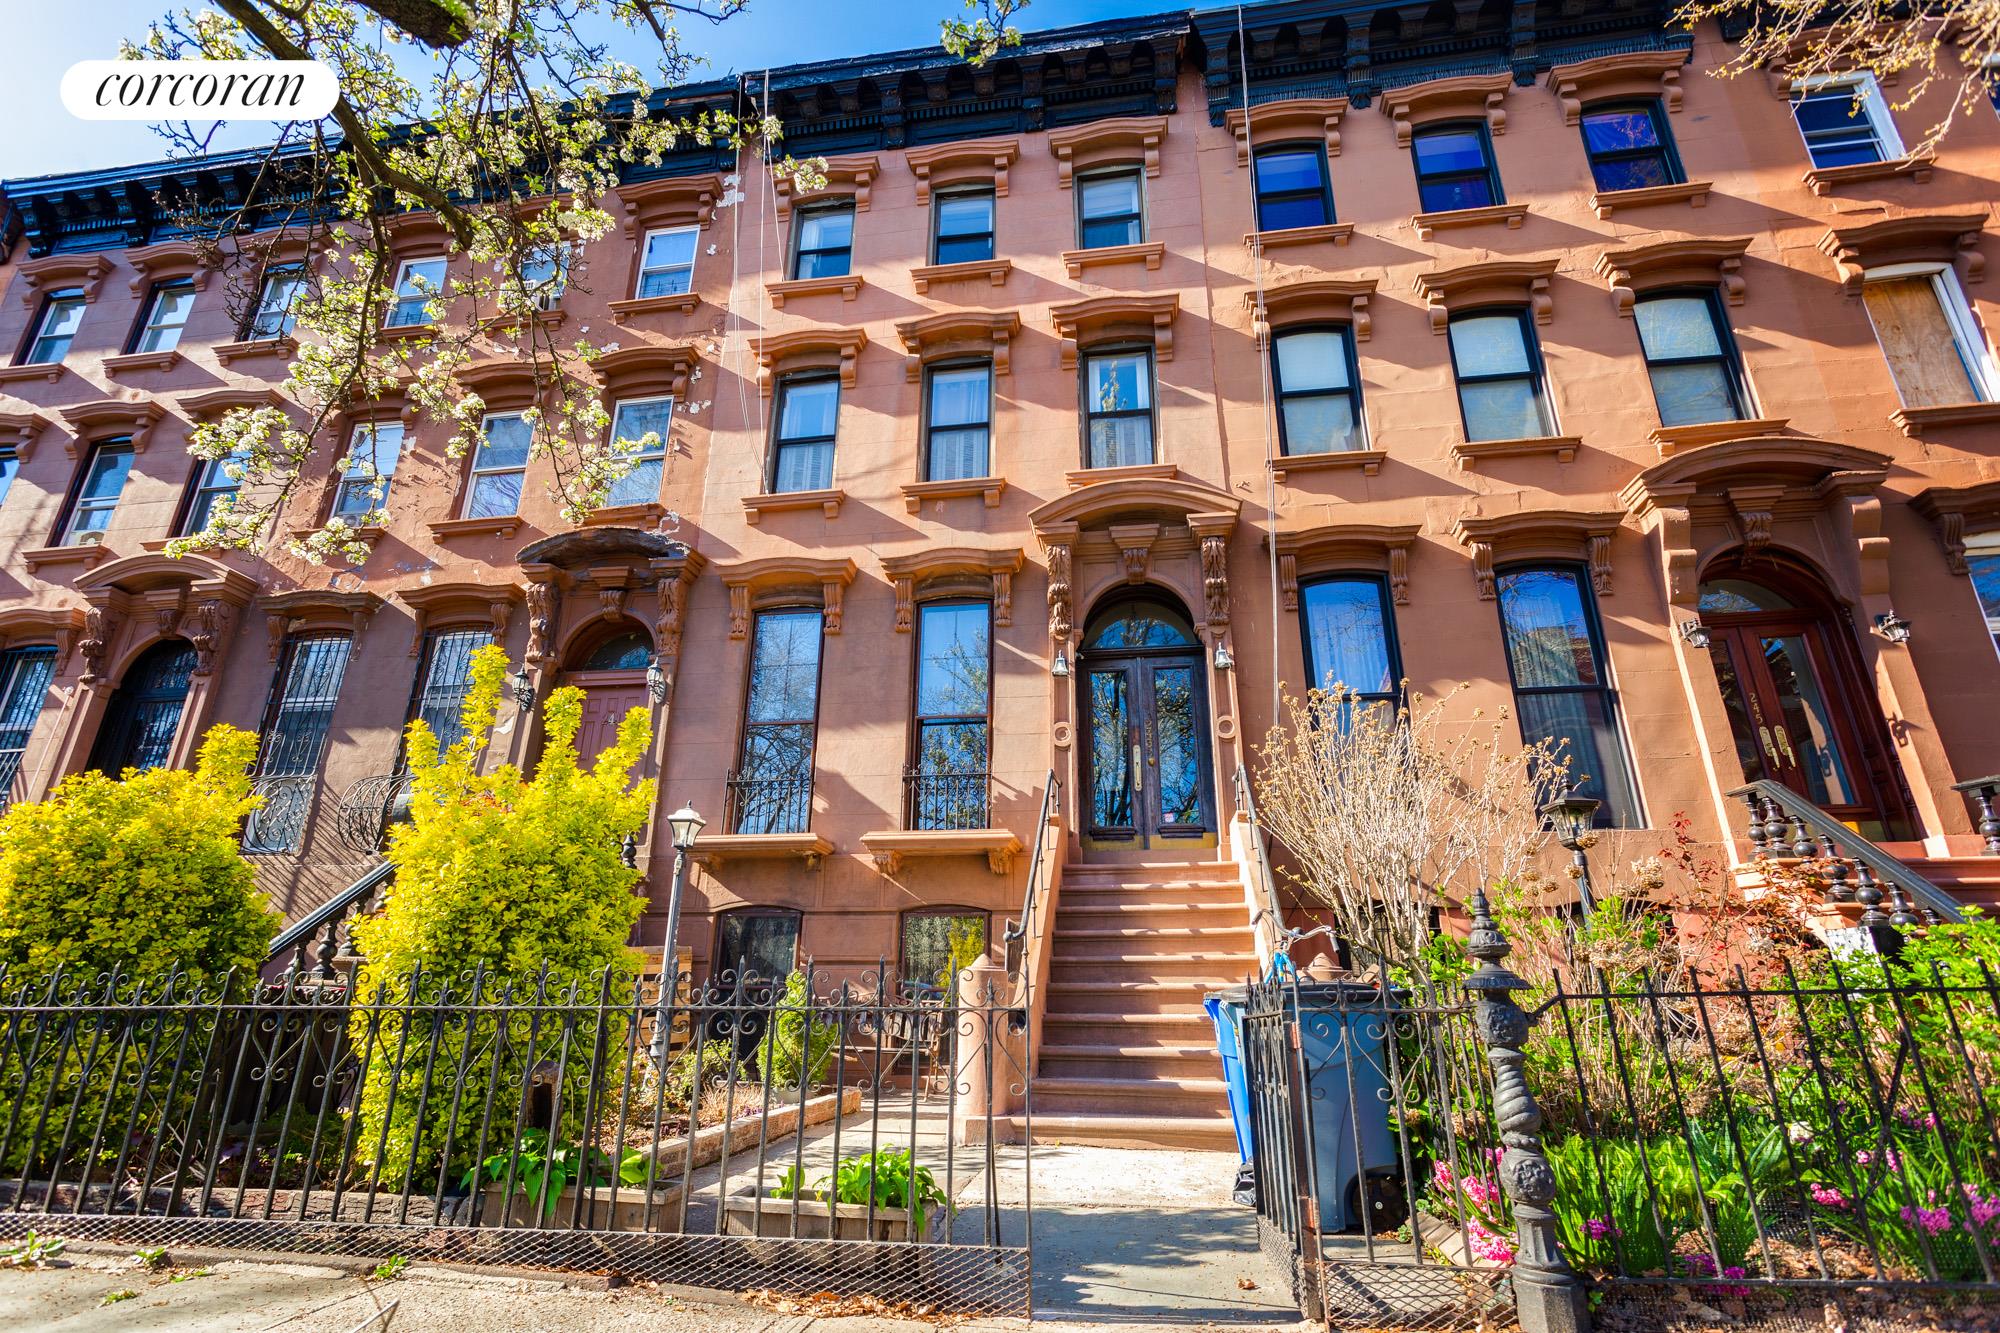 Welcome to 243 MacDonough Street, built in 1899! This Gorgeous 3 family brownstone awaits you! Miraculous opportunity to let your creativeness loose in this charming 4 story dream house consisting of 3,248 square feet of space to do with as you desire!   The home is as elegant inside as the tree-lined block it is situated on, which boasts majestic brownstones with original facades that have stood the test of time. This house boasts original well-kept details including wainscoting, 4 decorative fireplaces,   original shutters, ornate walls and center moldings, and a cellar for additional storage! Come start a new beginning in this house you will soon call home! The property is being sold AS-IS. Come to beautiful Stuyvesant Heights/Bedford Stuyvesant and experience   the best of old-world charm in this vibrant neighborhood, home to wonderful restaurants and staples of the neighborhood like Peaches, Chez Oskar, Bed-Vyne, Saraghina, Mama Fox, Eugene & Company just to name a few. Located a few blocks of transportation (A,   C, LIRR) and across the street from Decatur Park, and tennis court! Contact me for more information.